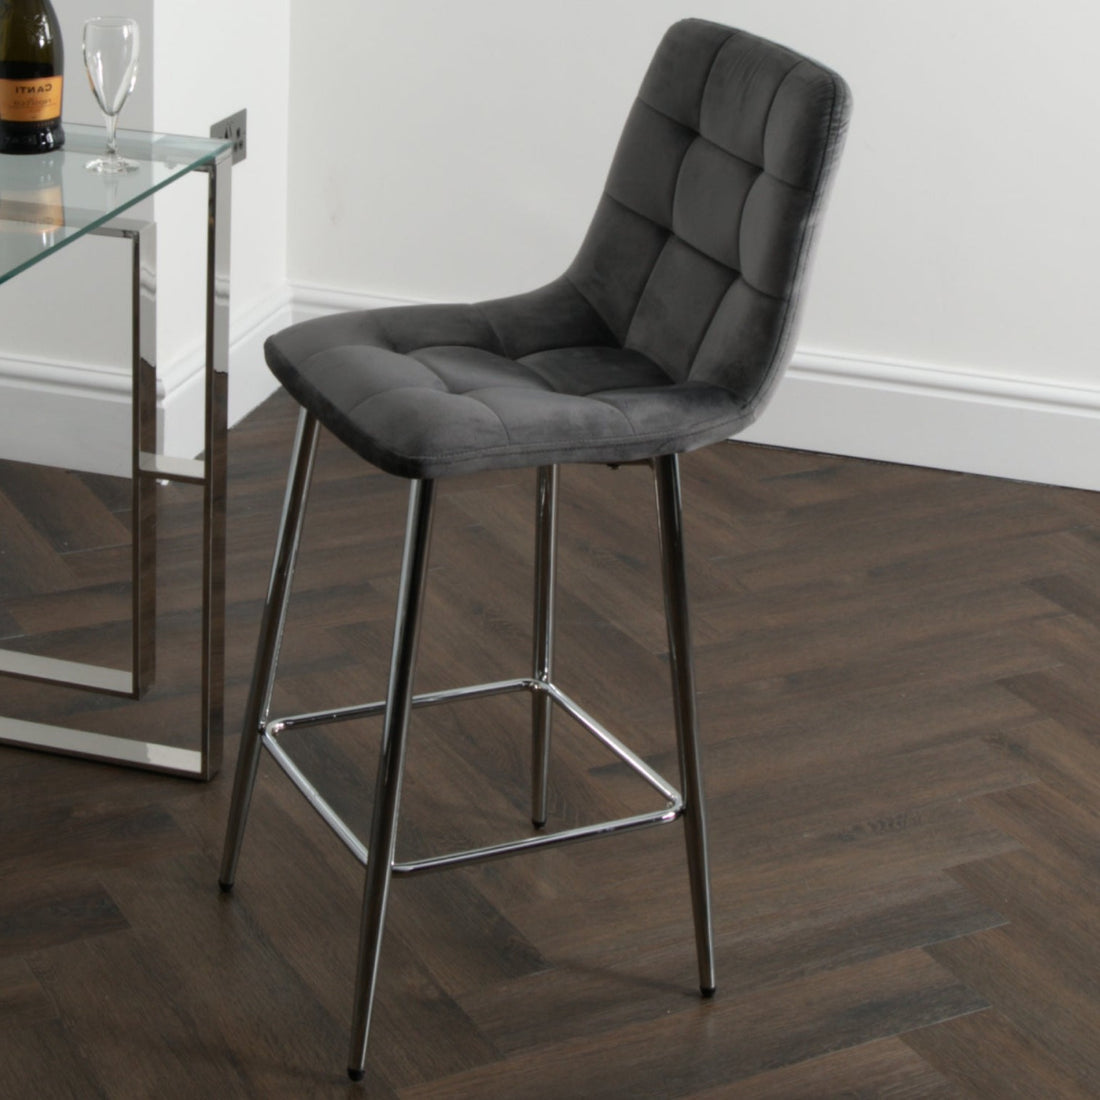 How Modern Bars Stools Can Add Versatility to Your Home